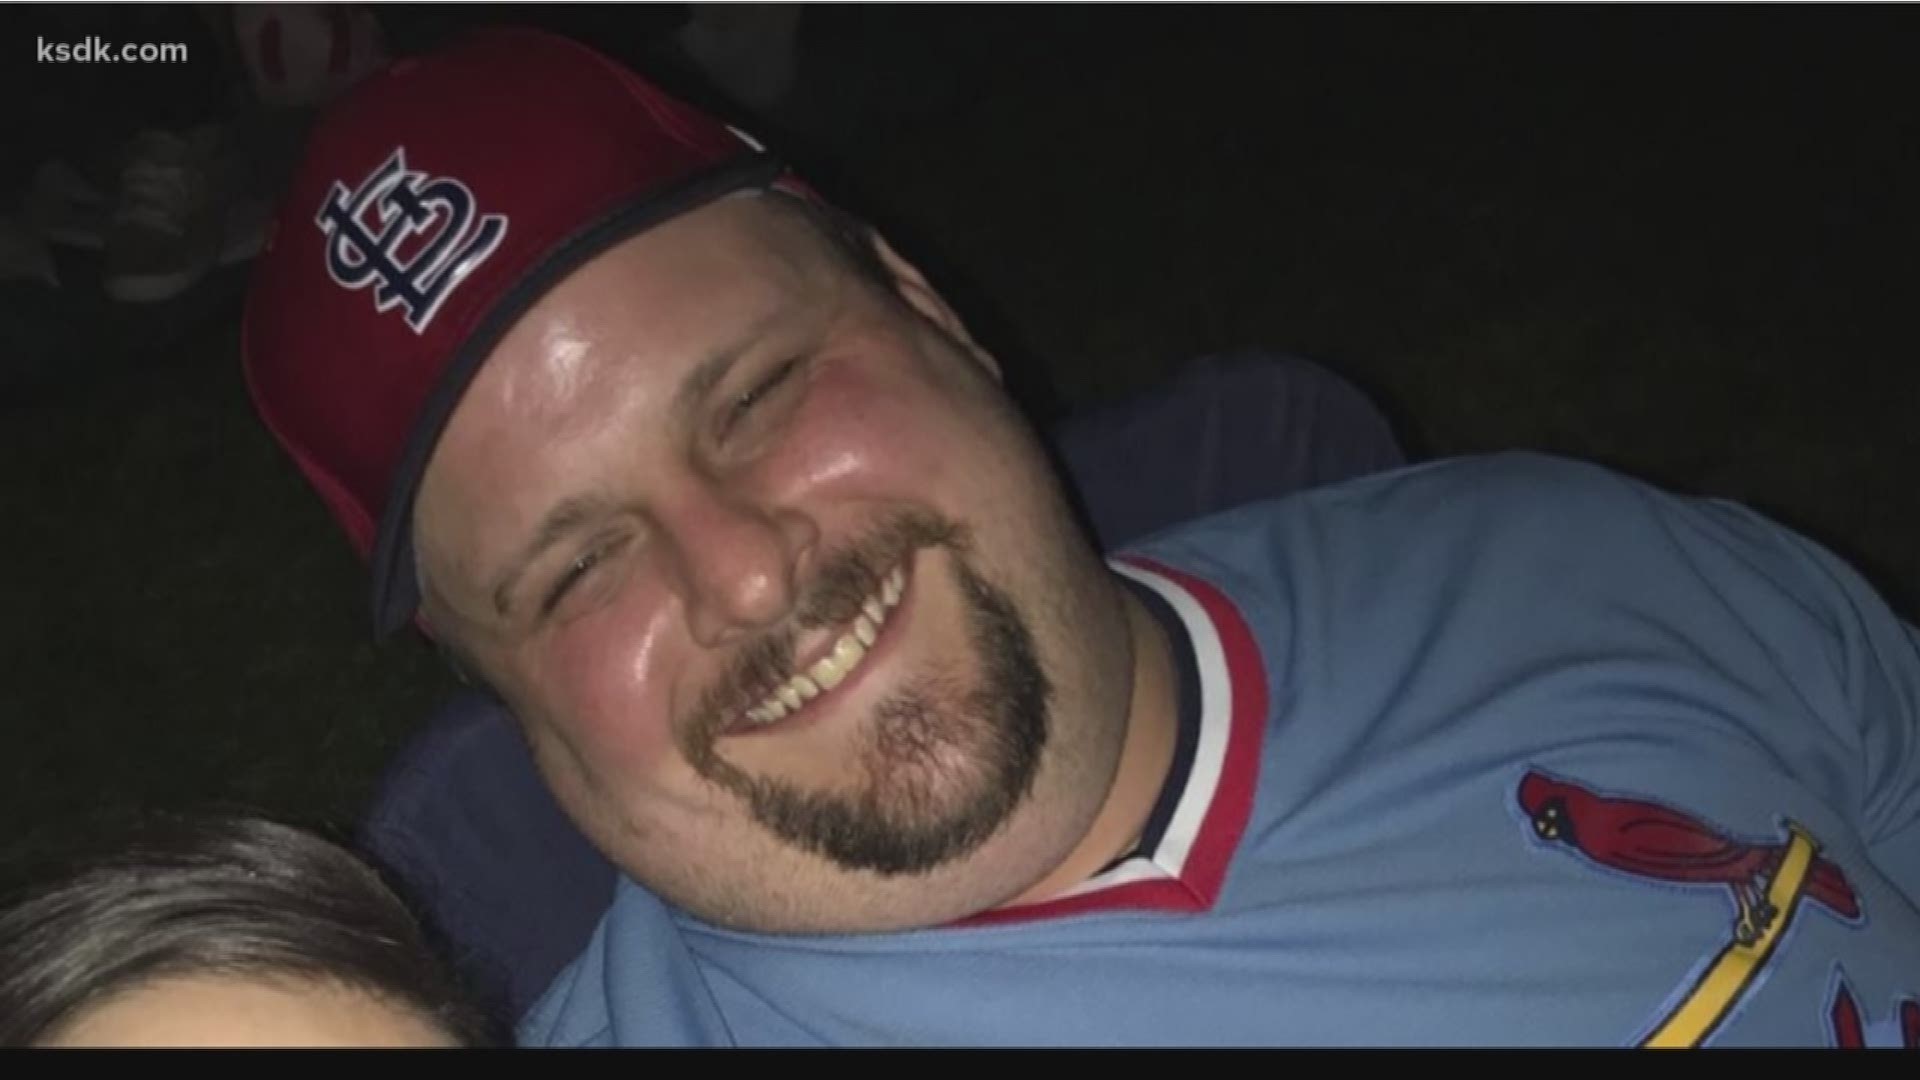 Matthew Grasser, 35, of Florissant was killed in the accident.